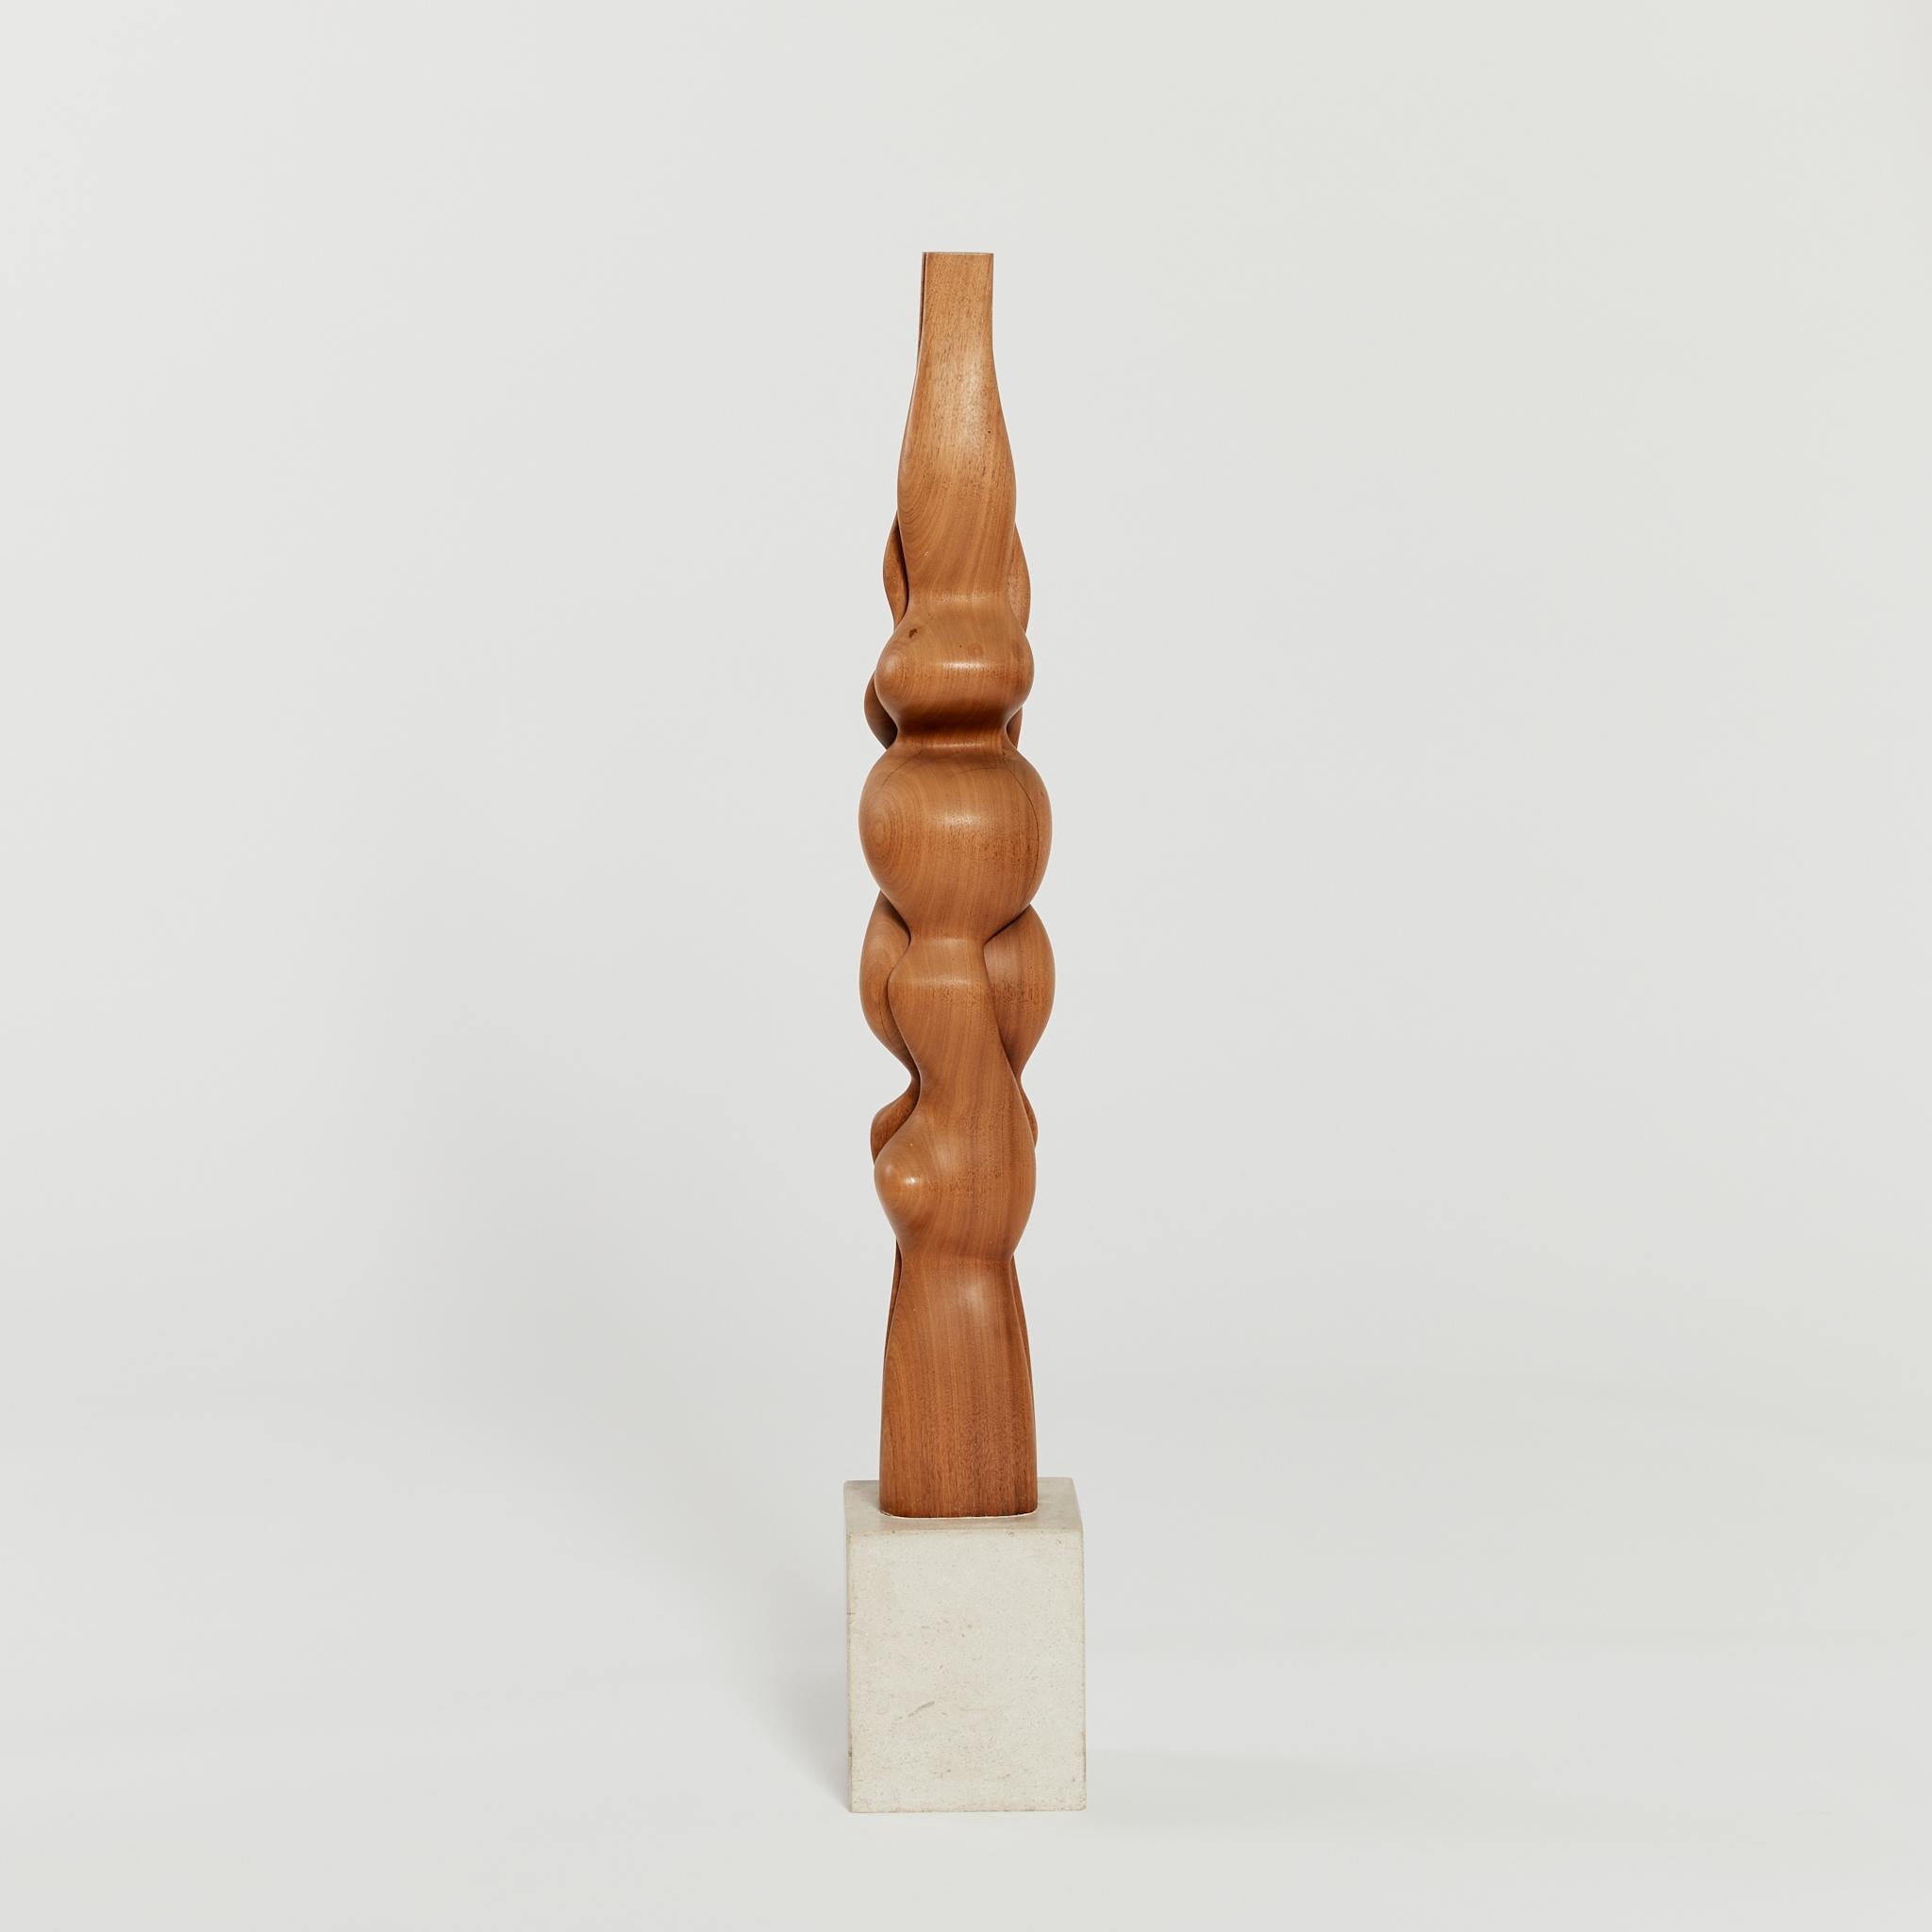 English Tall Biomorphic Wood Floor Sculpture with Concrete Plinth